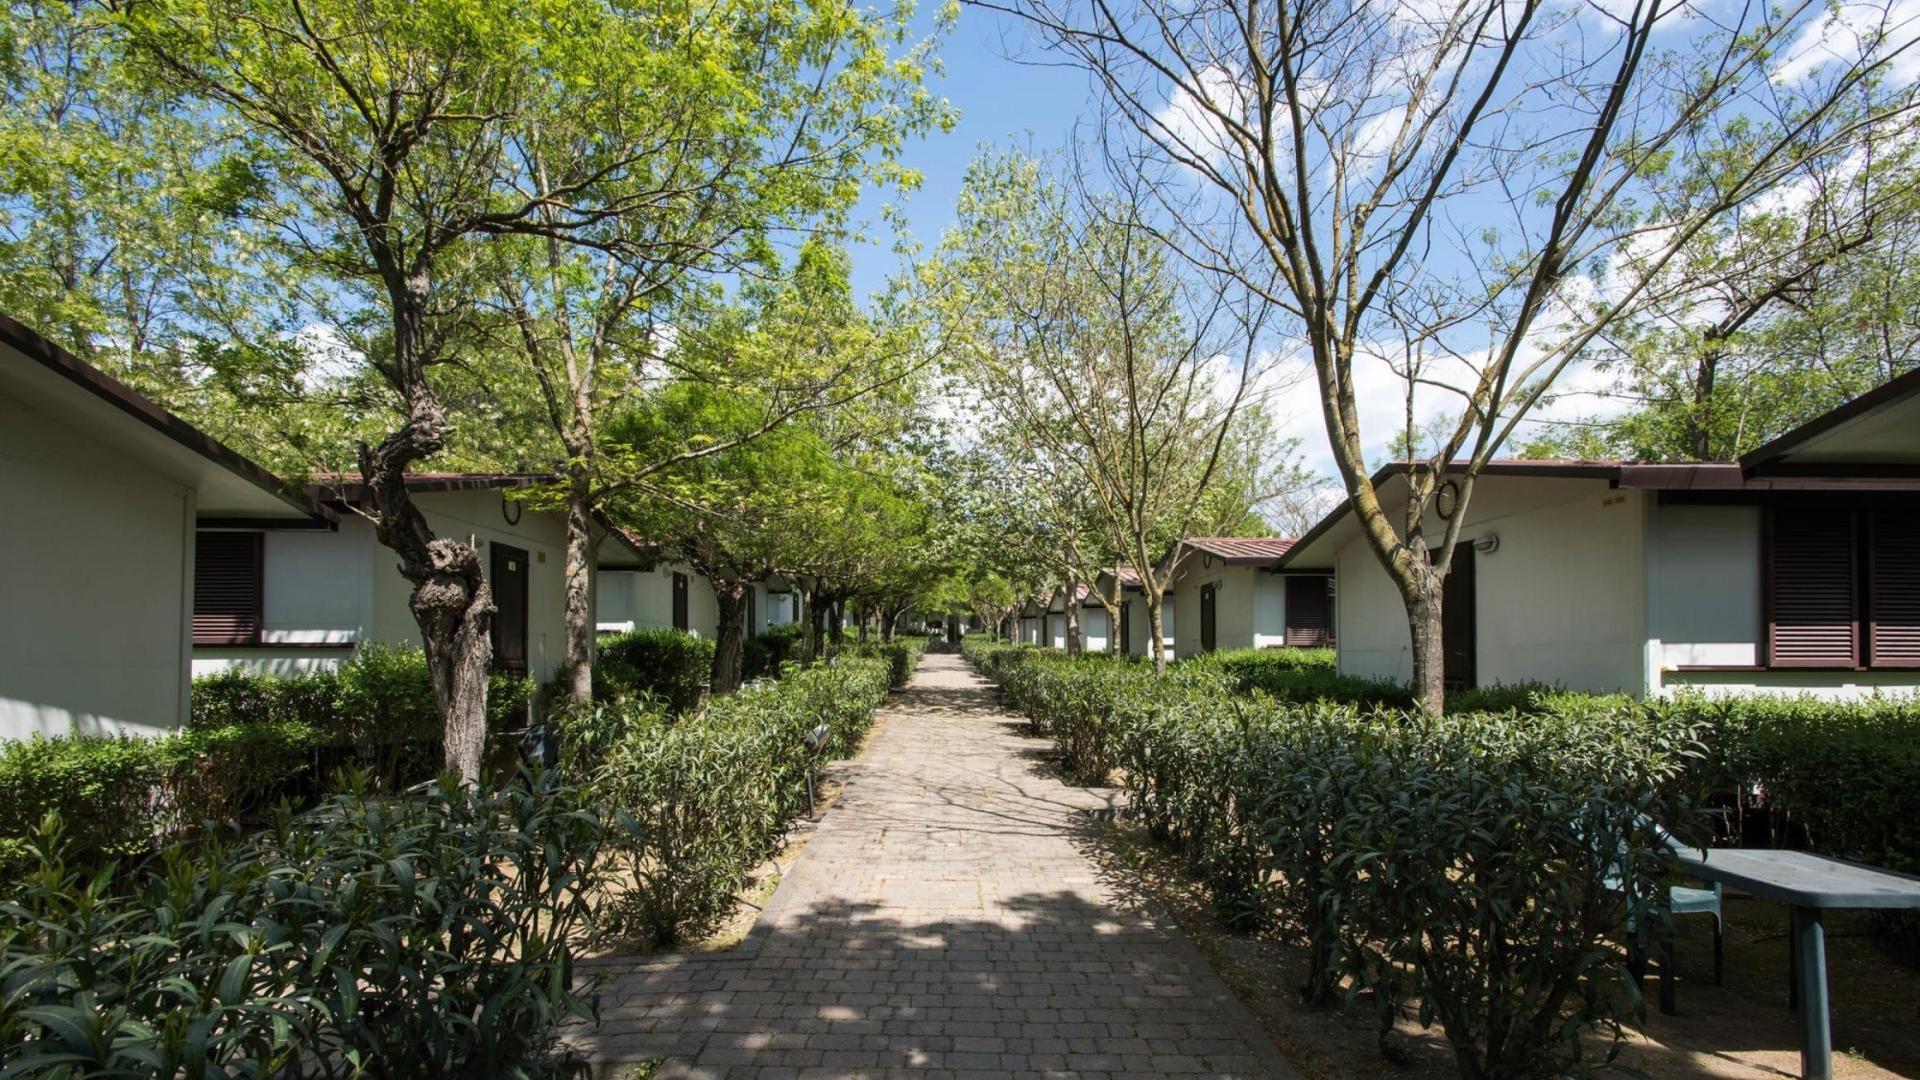 A tree-lined path between small houses with greenery on a sunny day.